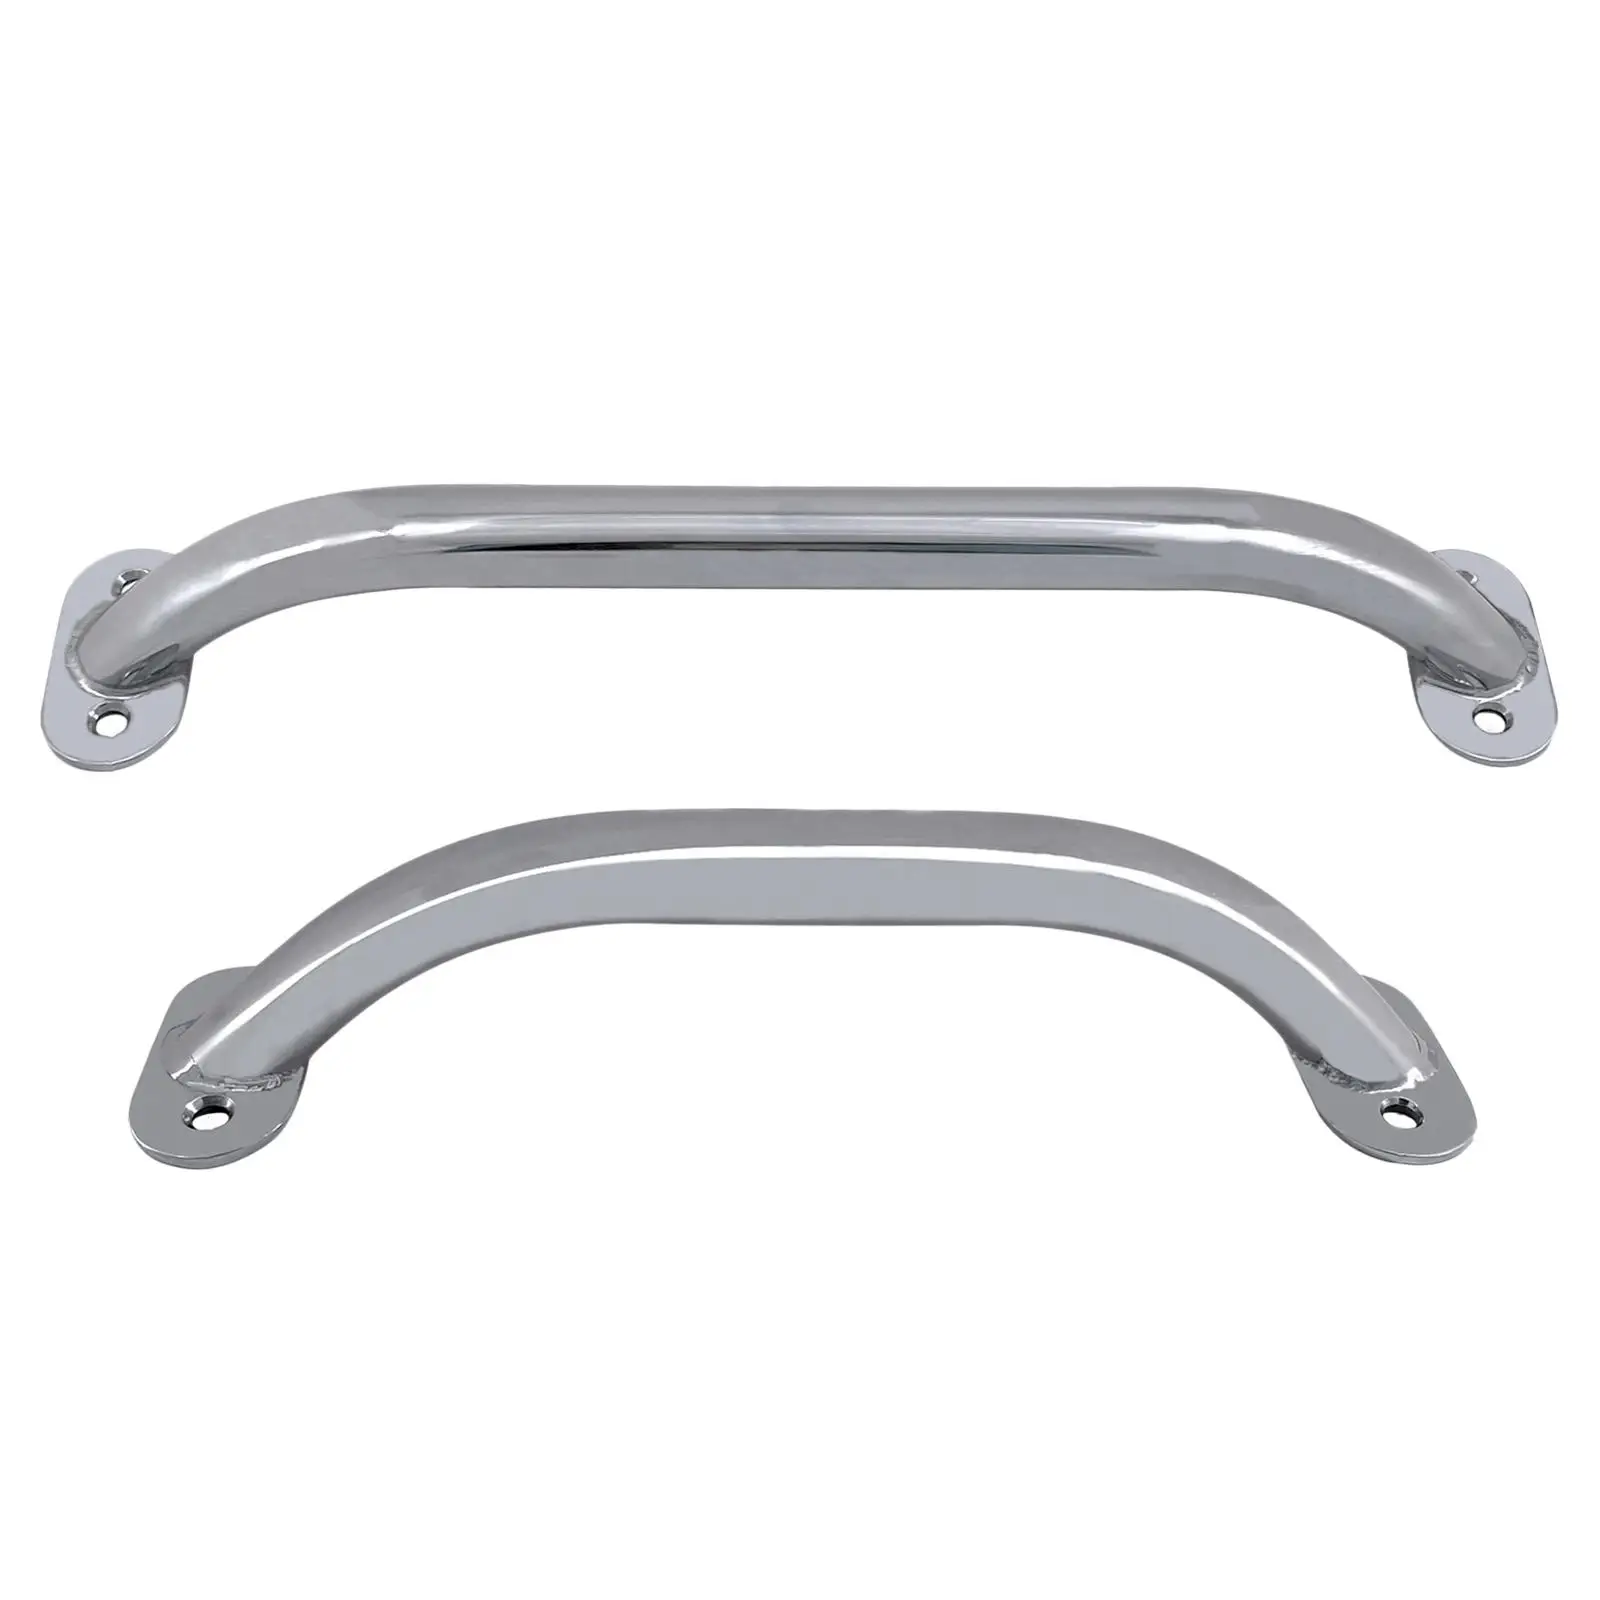 Stainless Steel Boat Grab Handle, Polished Marine Handrail, Hardware Grab Bar for Marine RV Yacht Boat Accessories